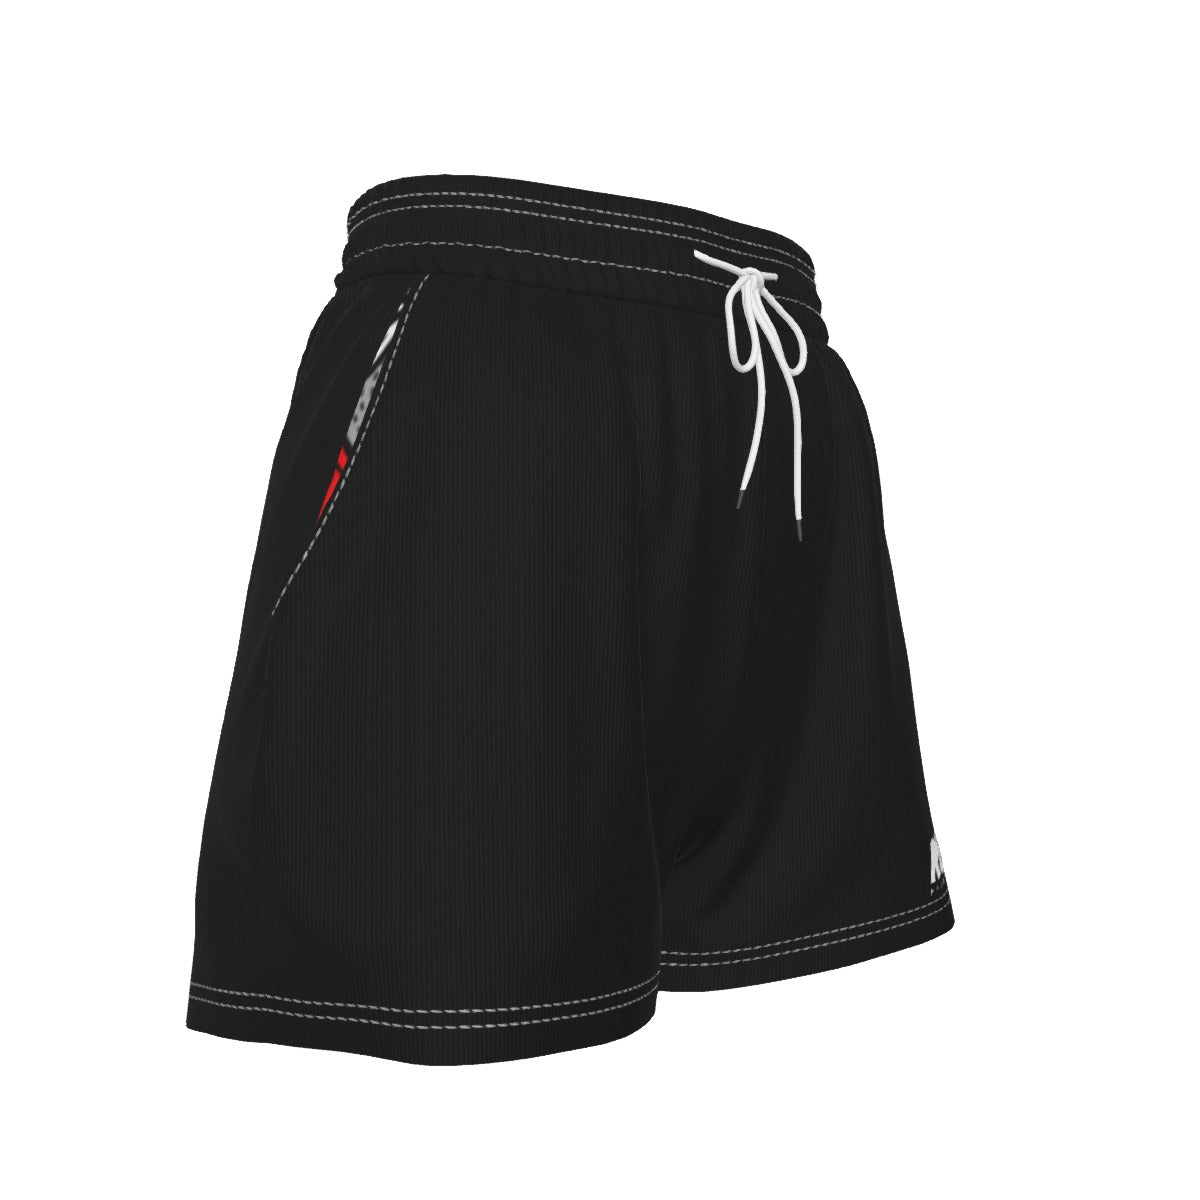 Simply Ruthless Women's Shorts